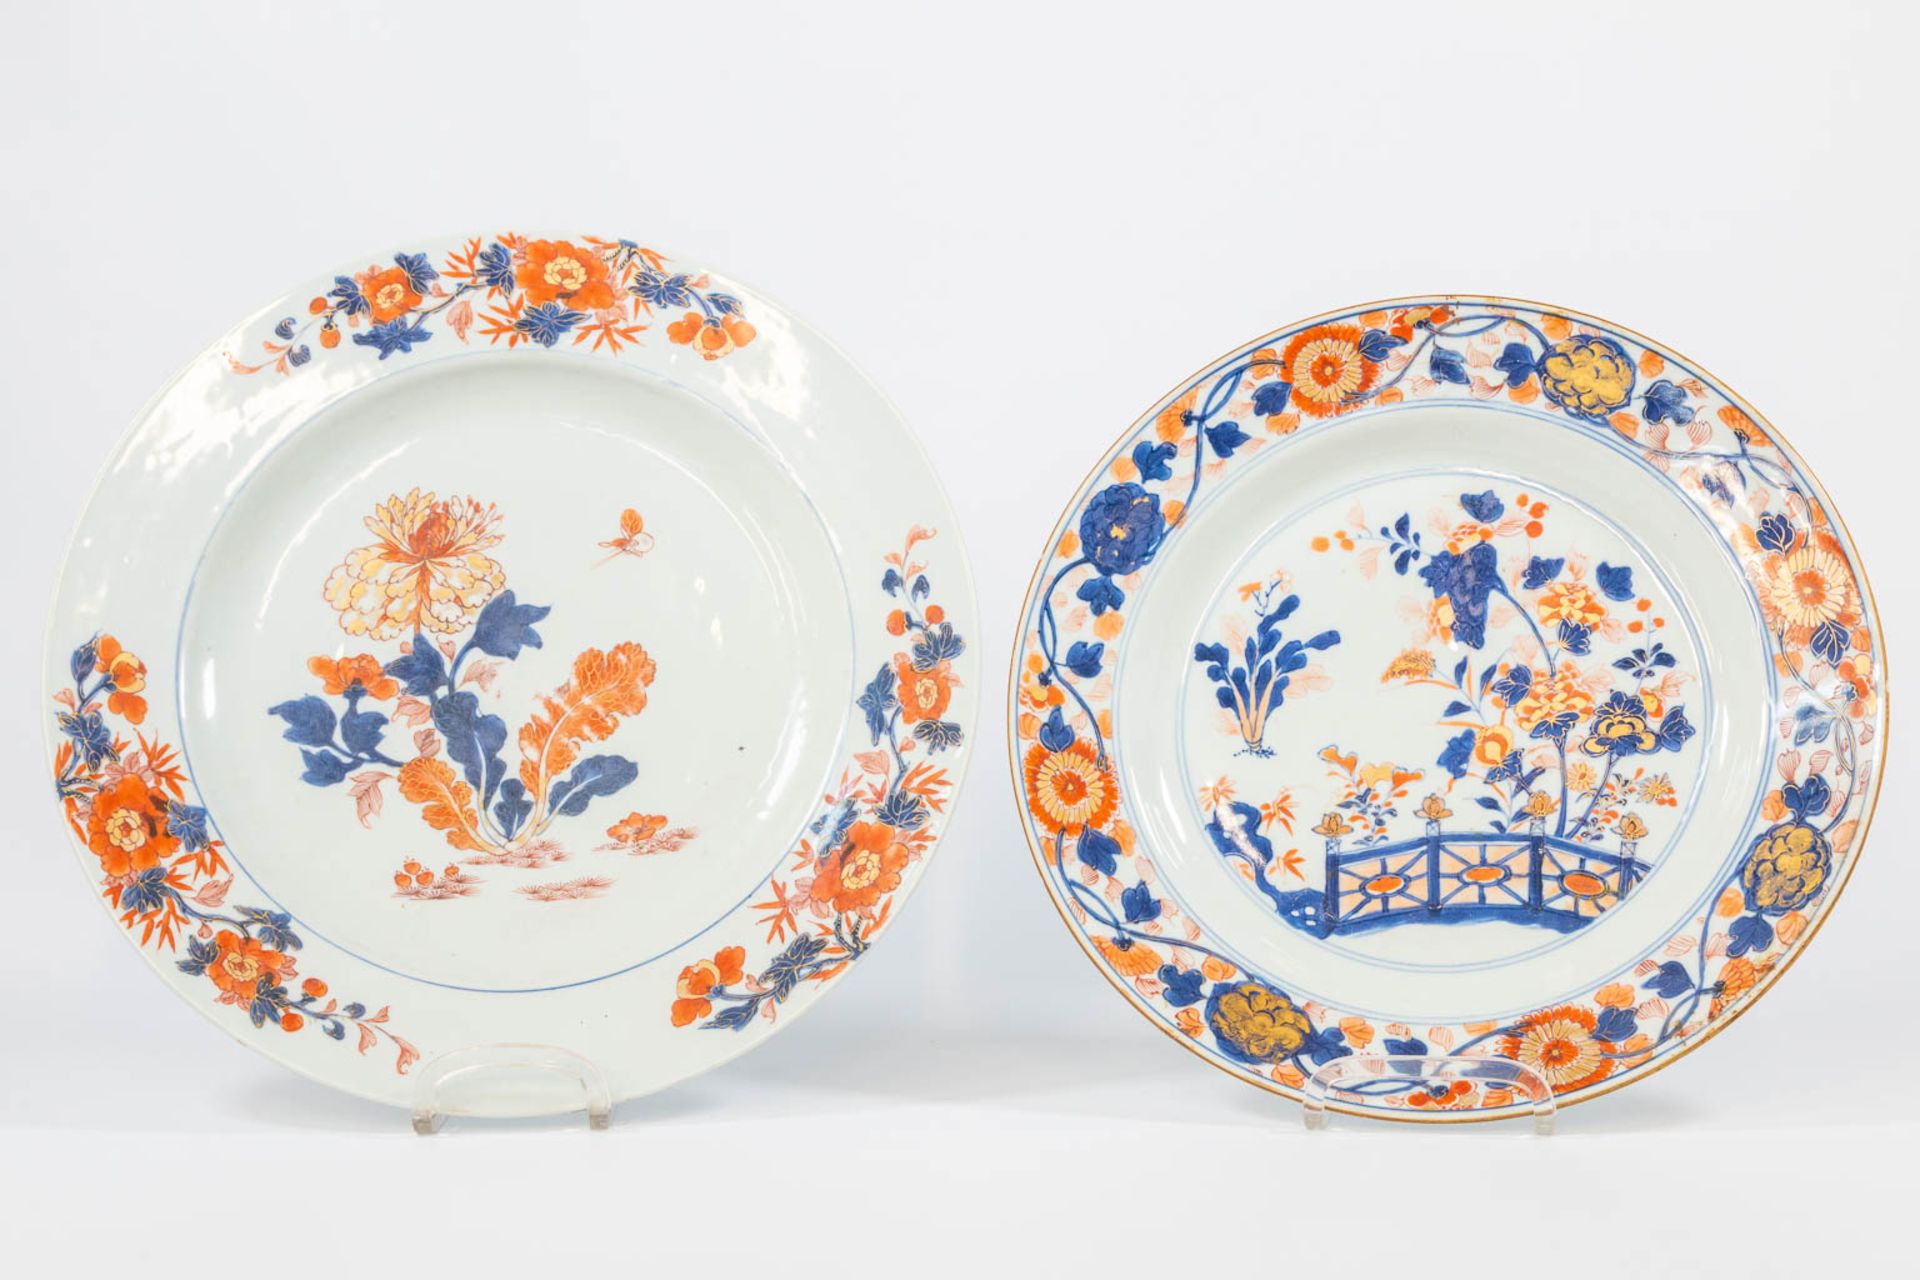 A collection of 6 famille rose objects and plates, made of porcelain. - Image 20 of 24